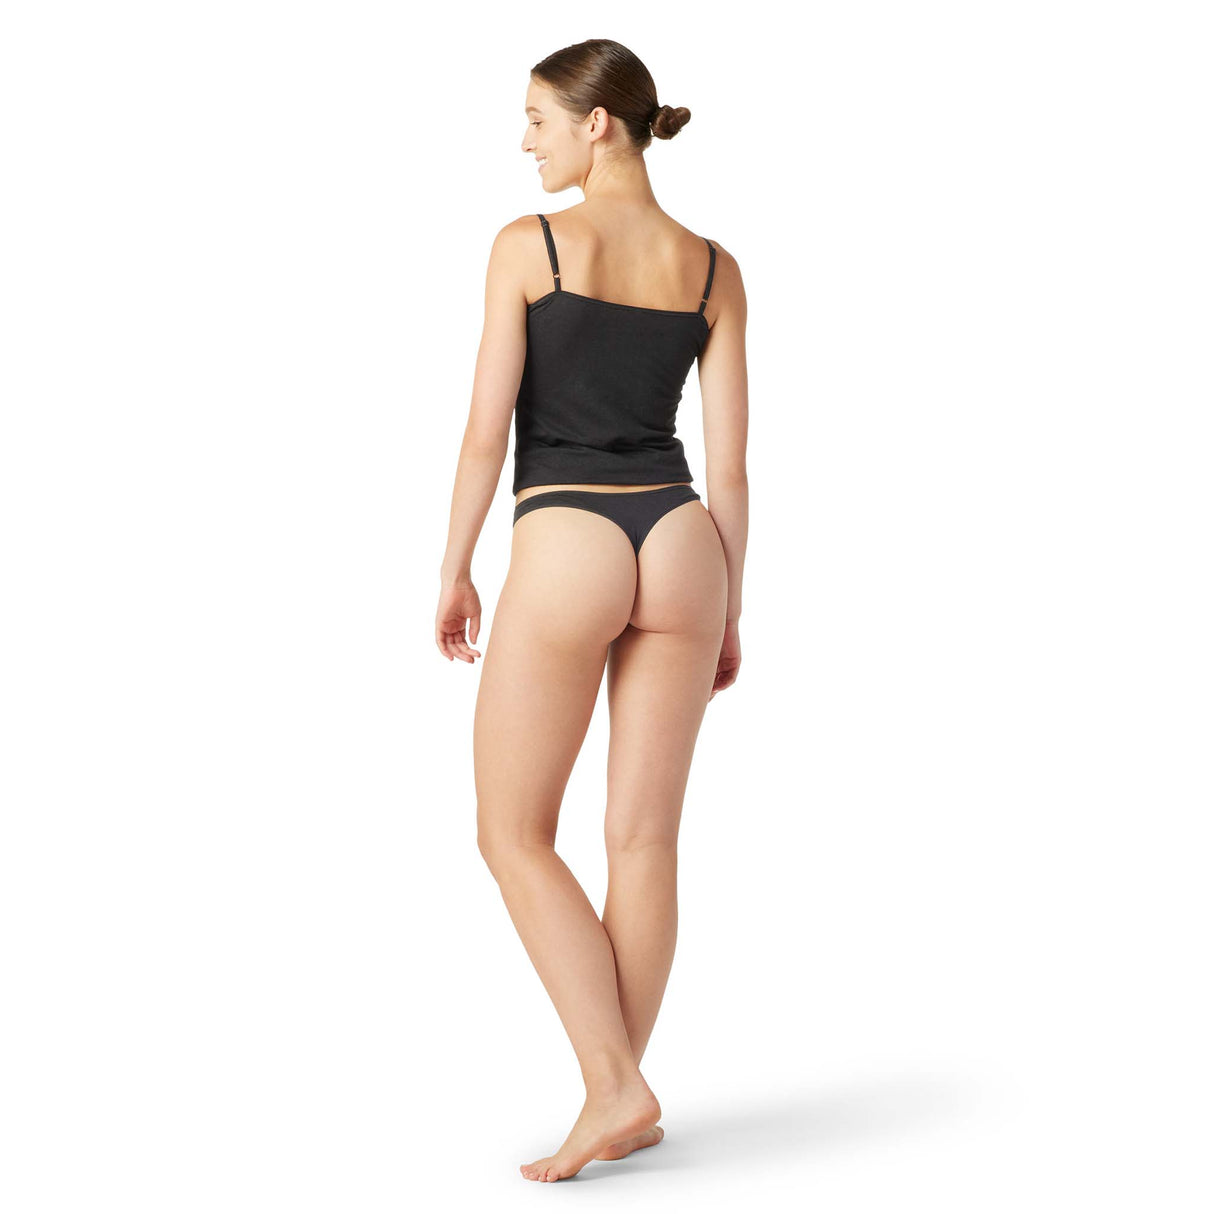 Smartwool Merino 150 Lace Thong string dentelle pour femme dos